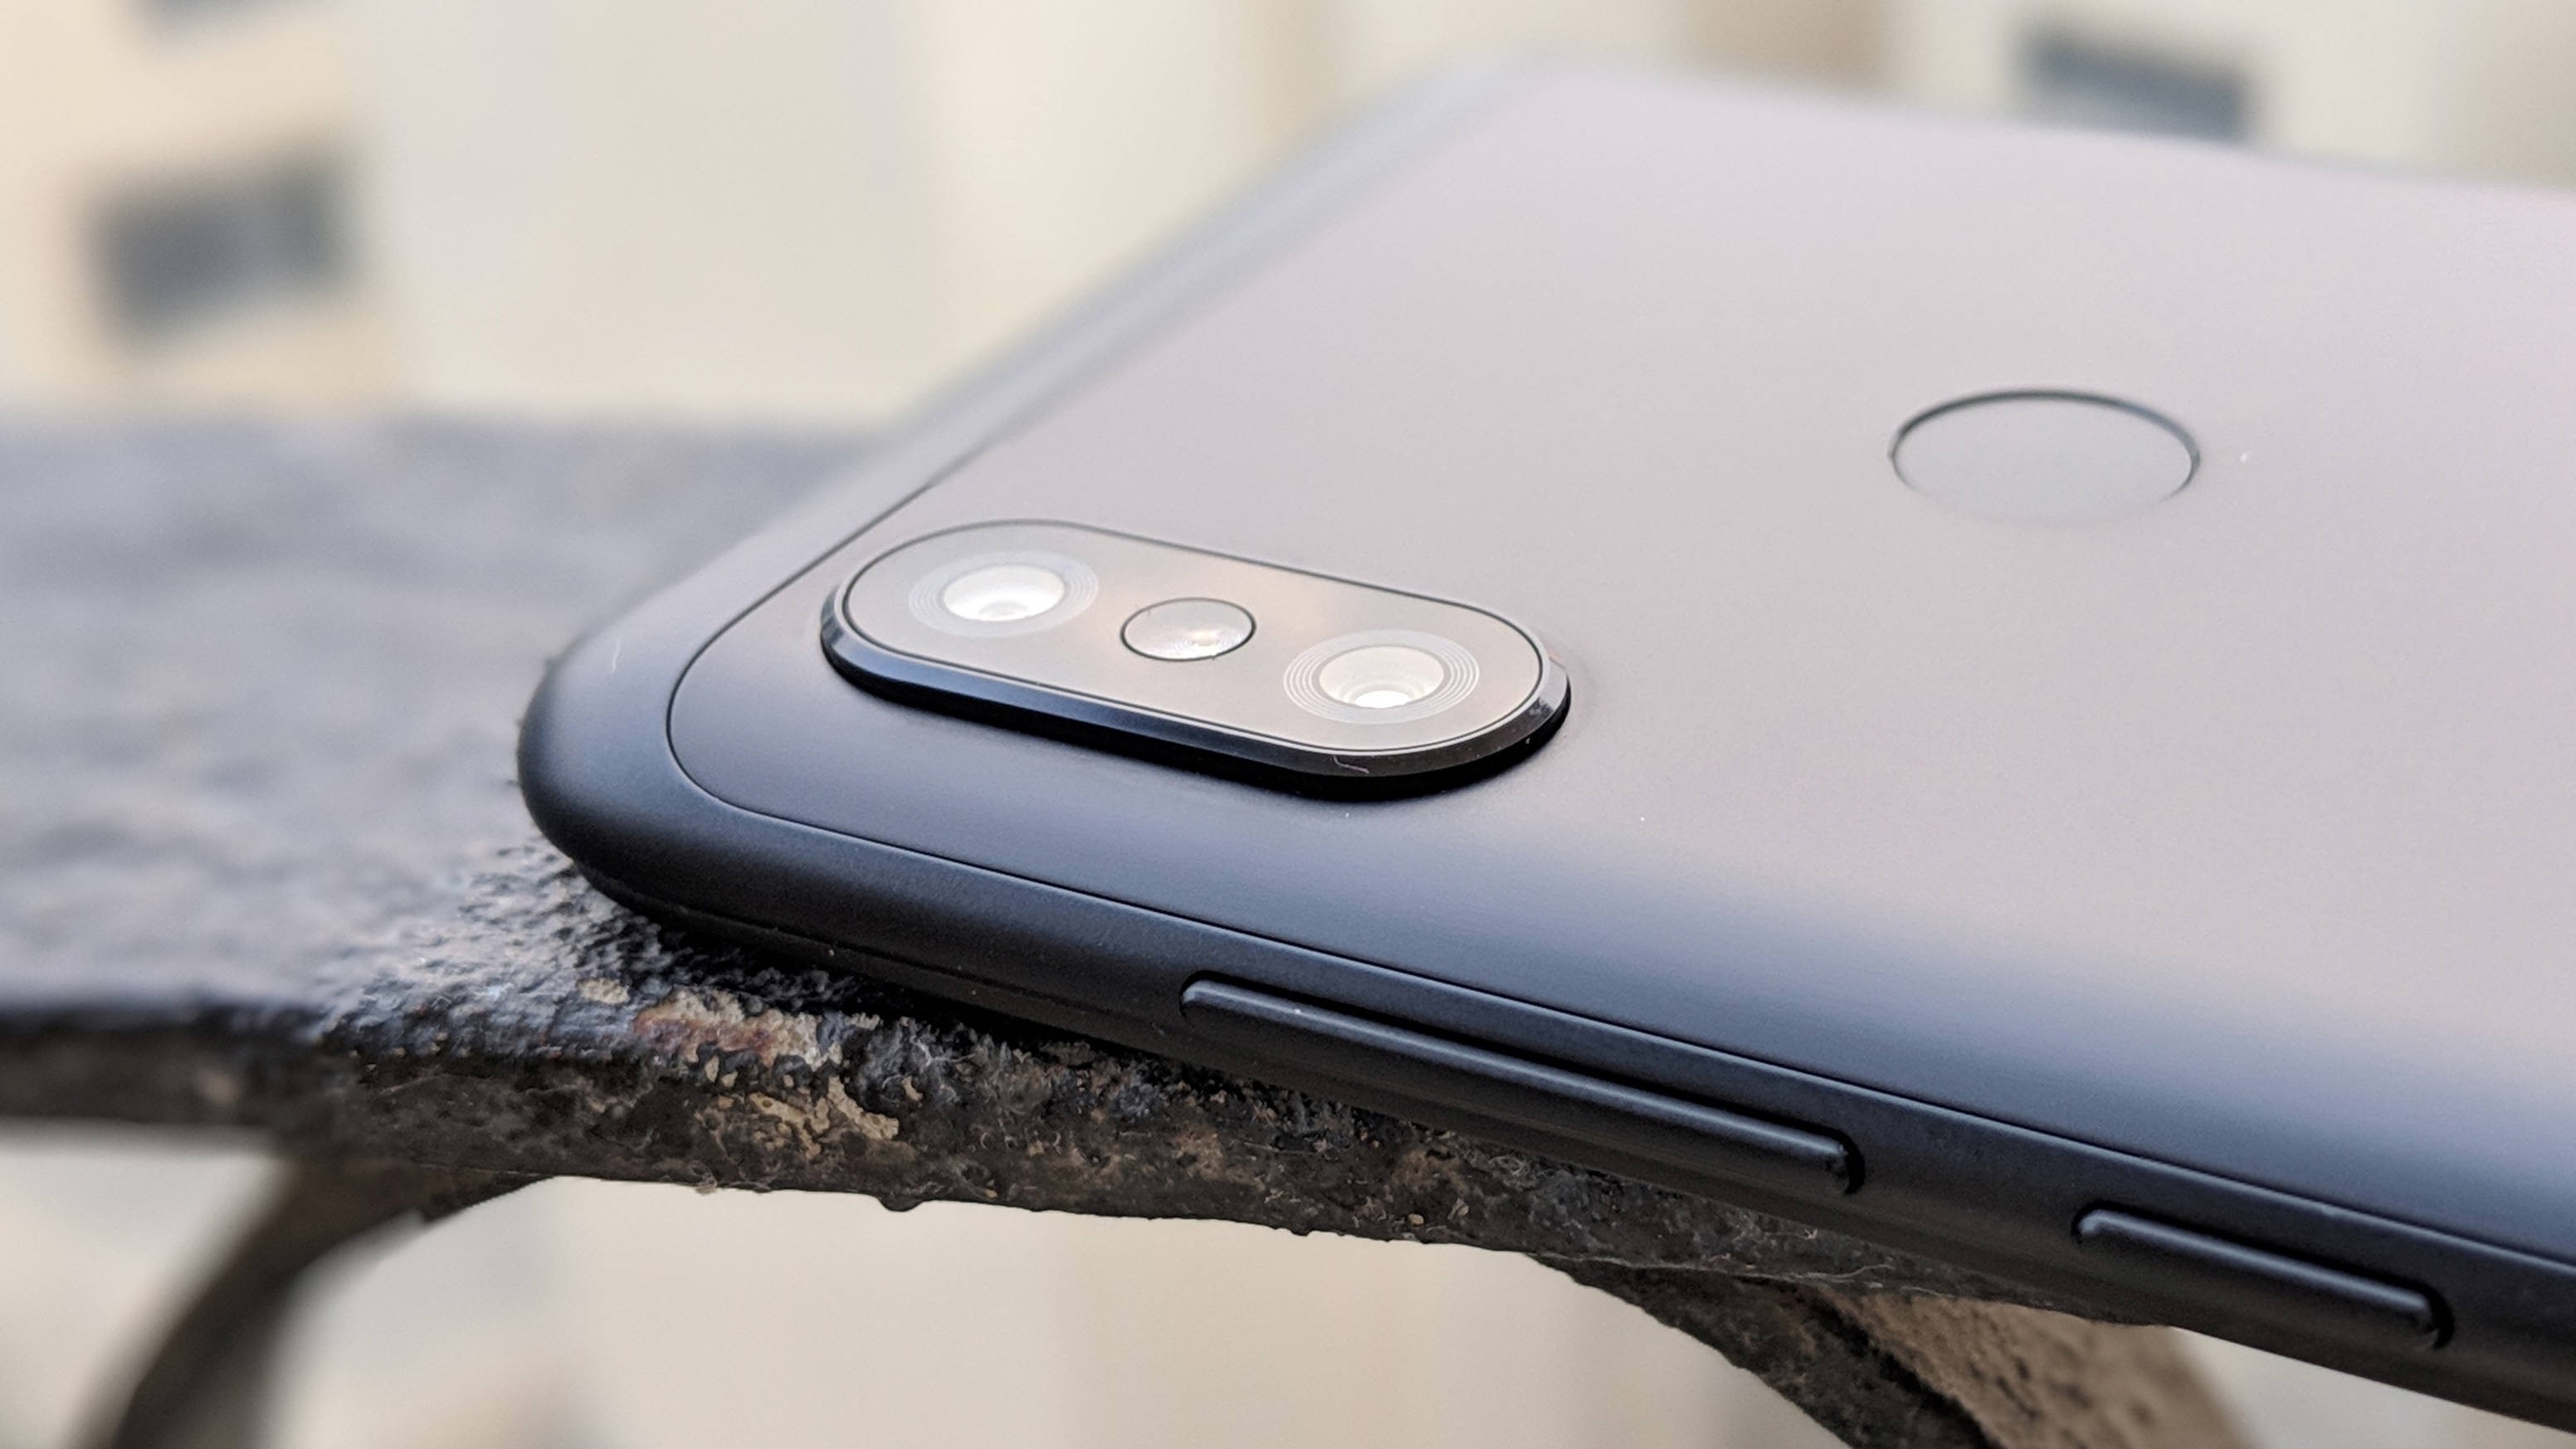 Close-up photo of the back dual cameras on Redmi Note 6 Pro